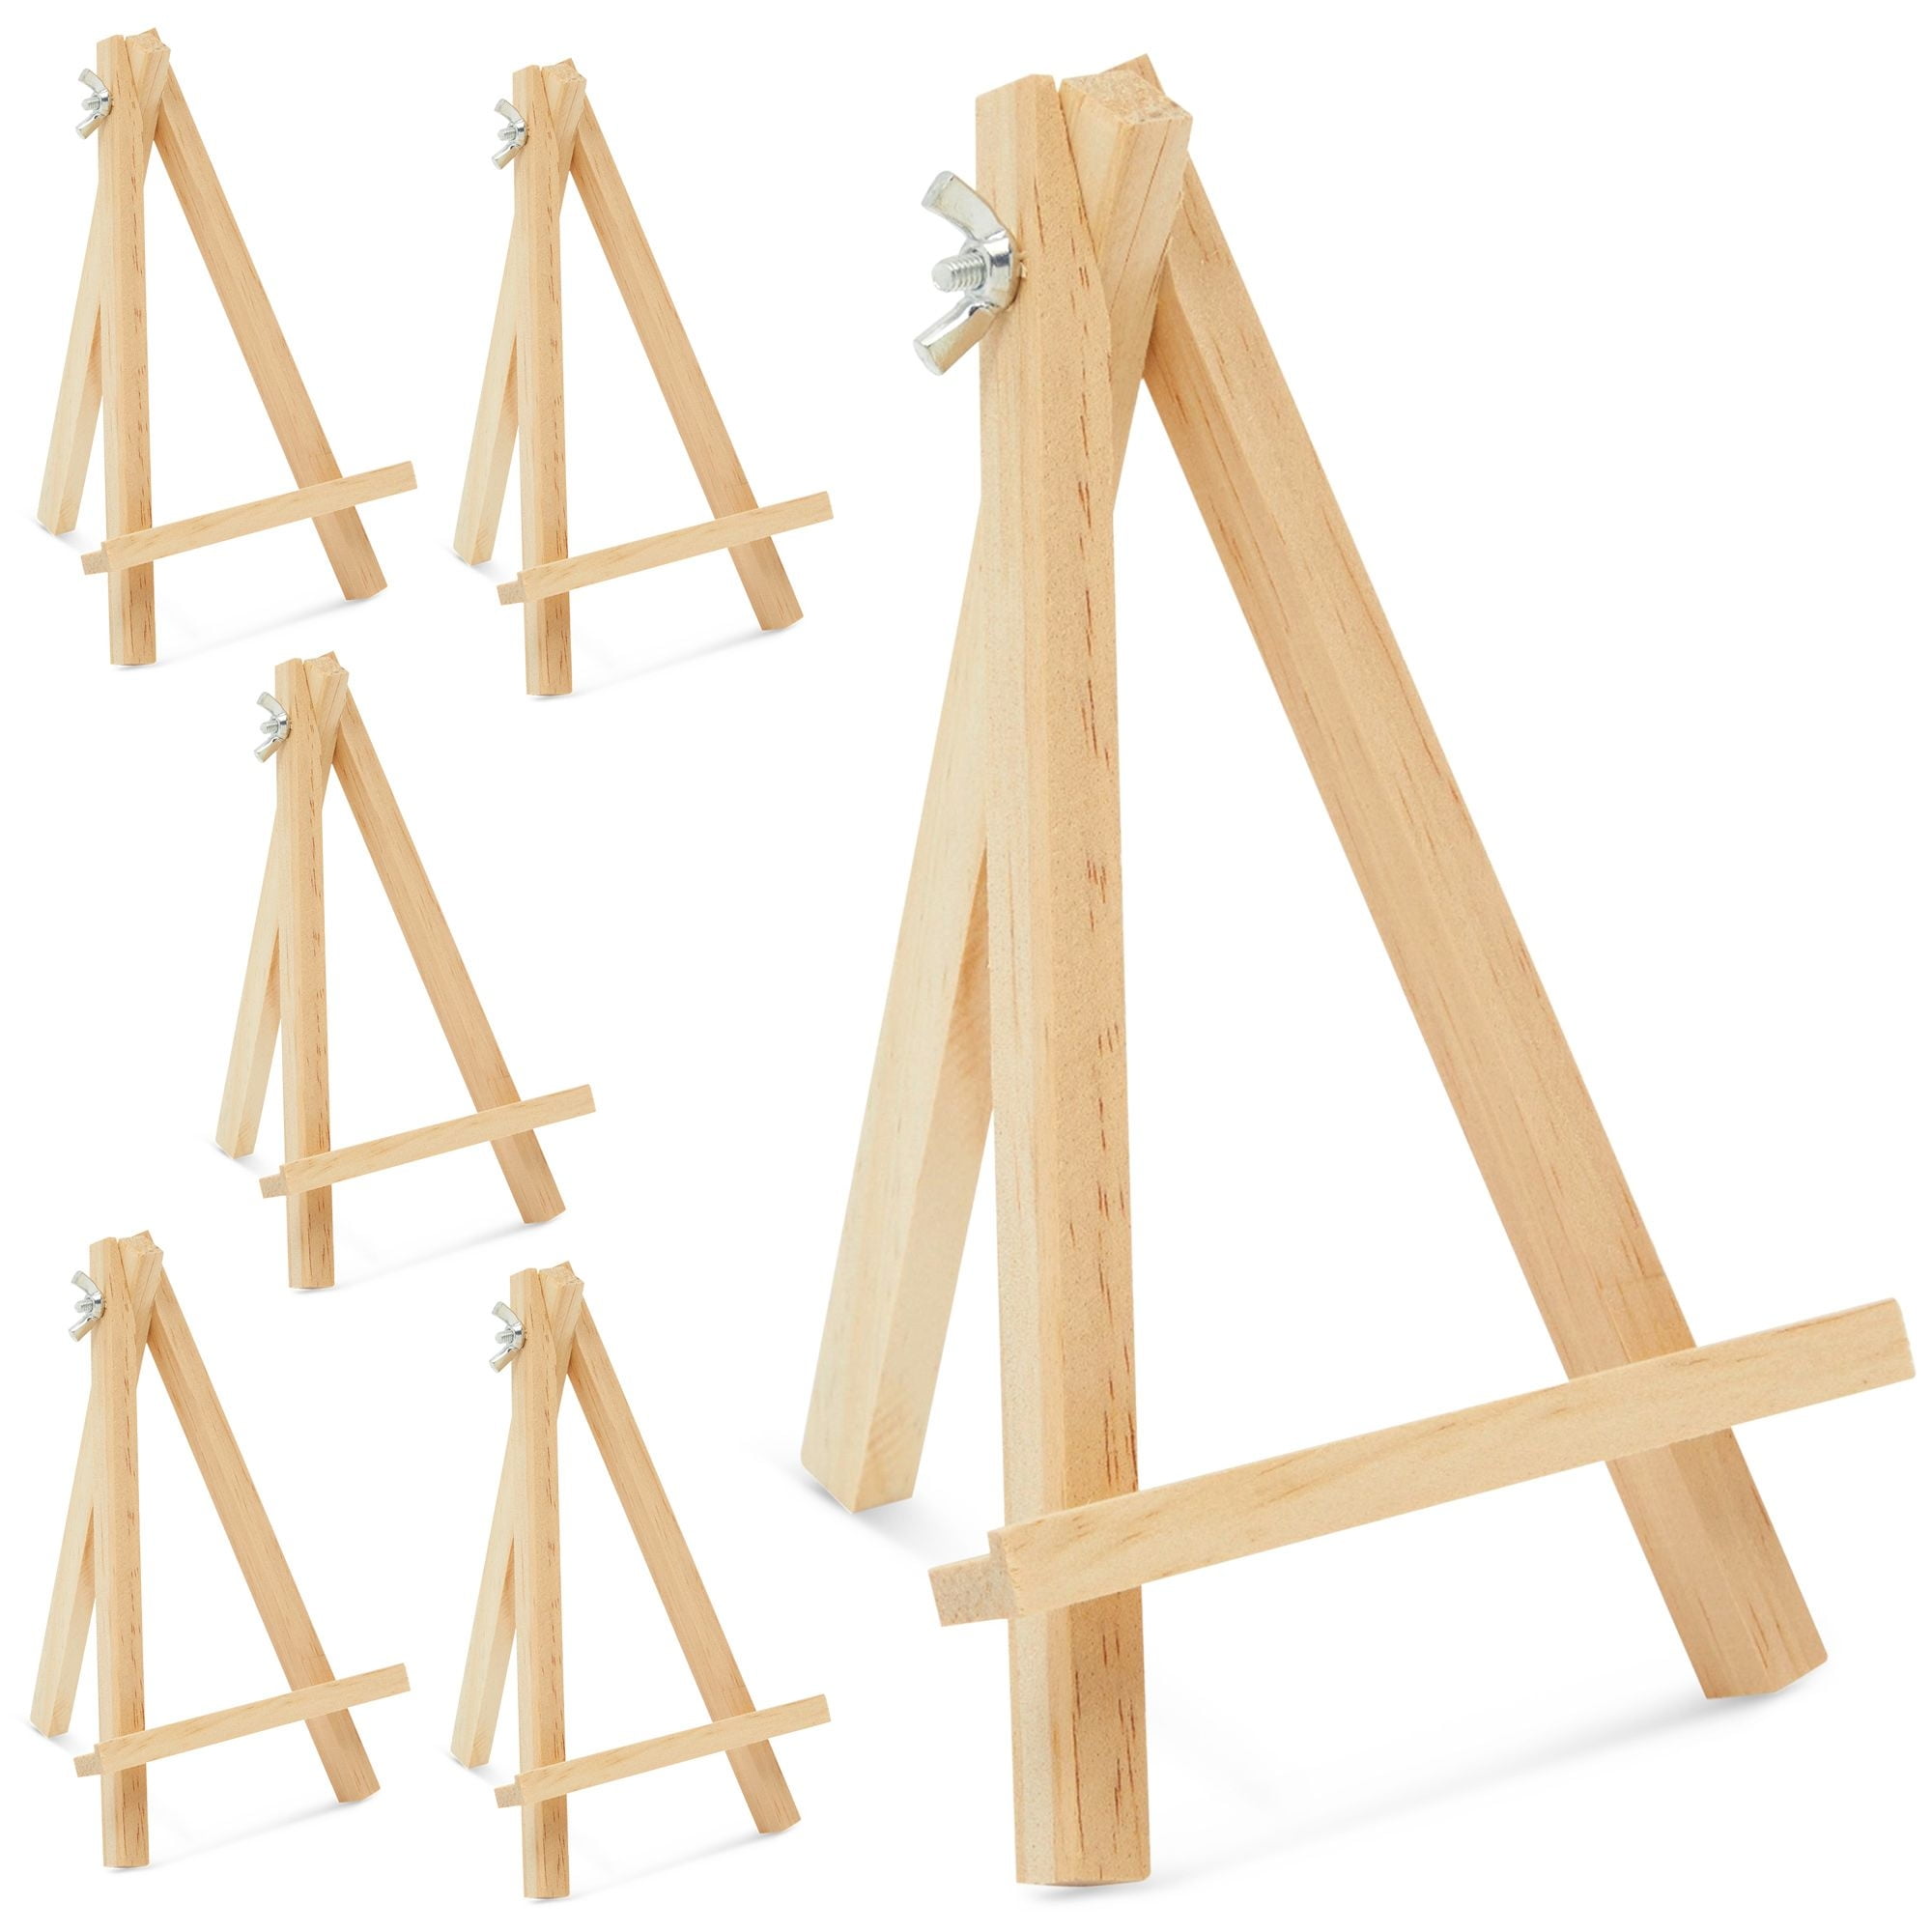 Wooden Mini Easel Stand for Desk or Tabletop (9 x 13.5 Inches, 24